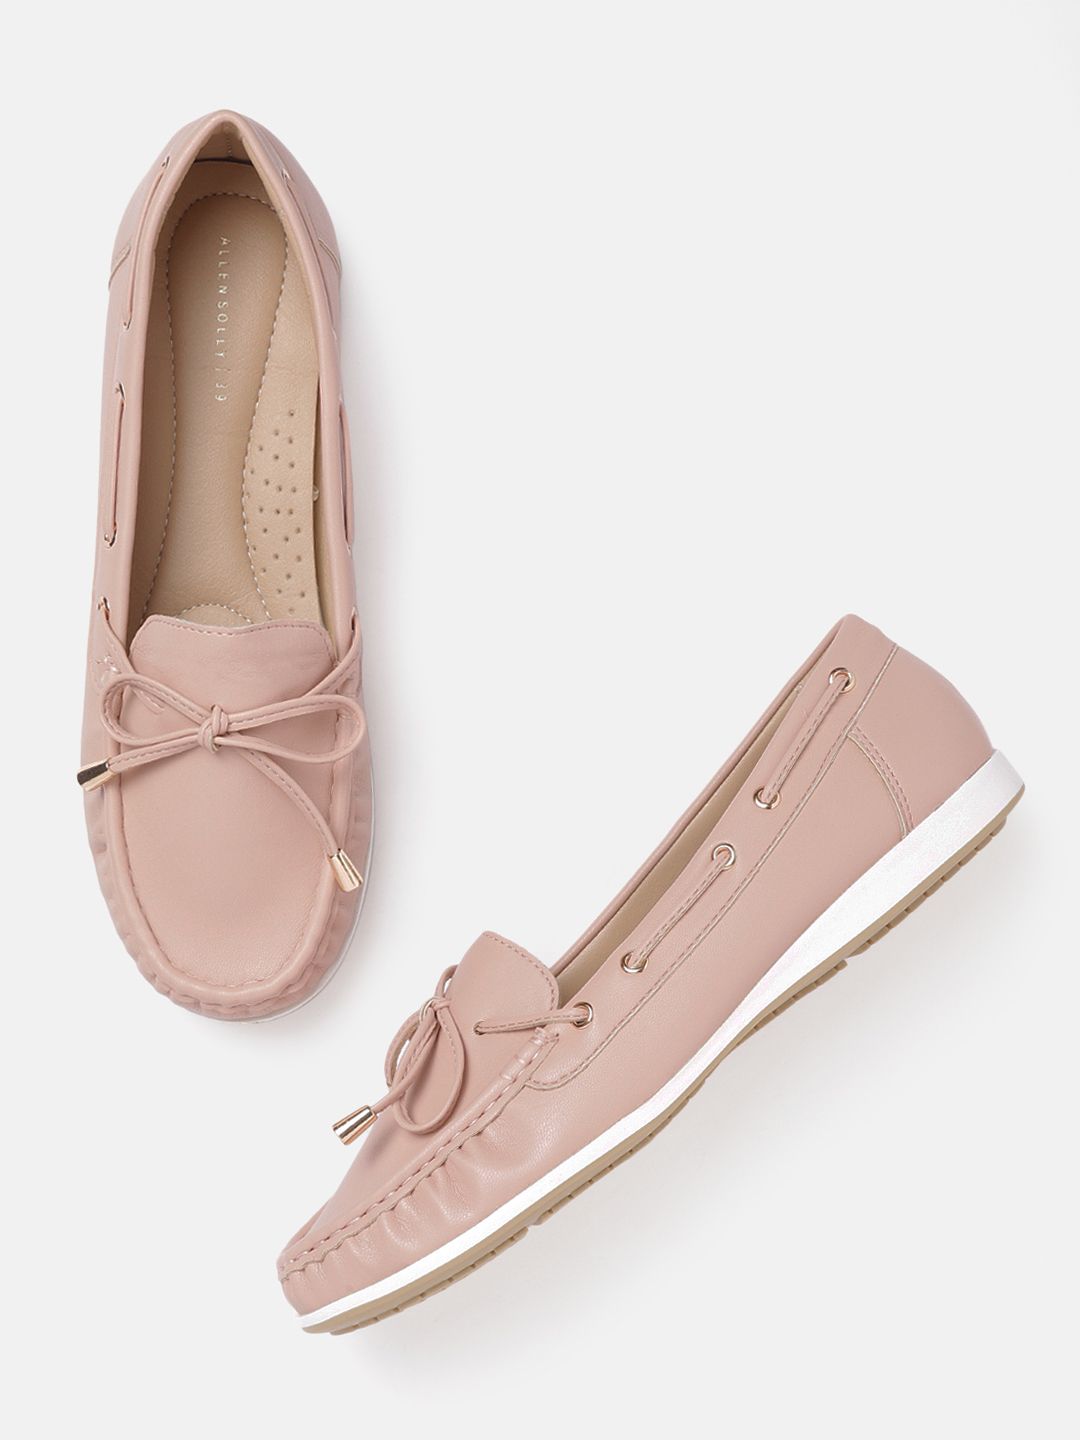 Allen Solly Women Pink Solid Boat Shoes Price in India